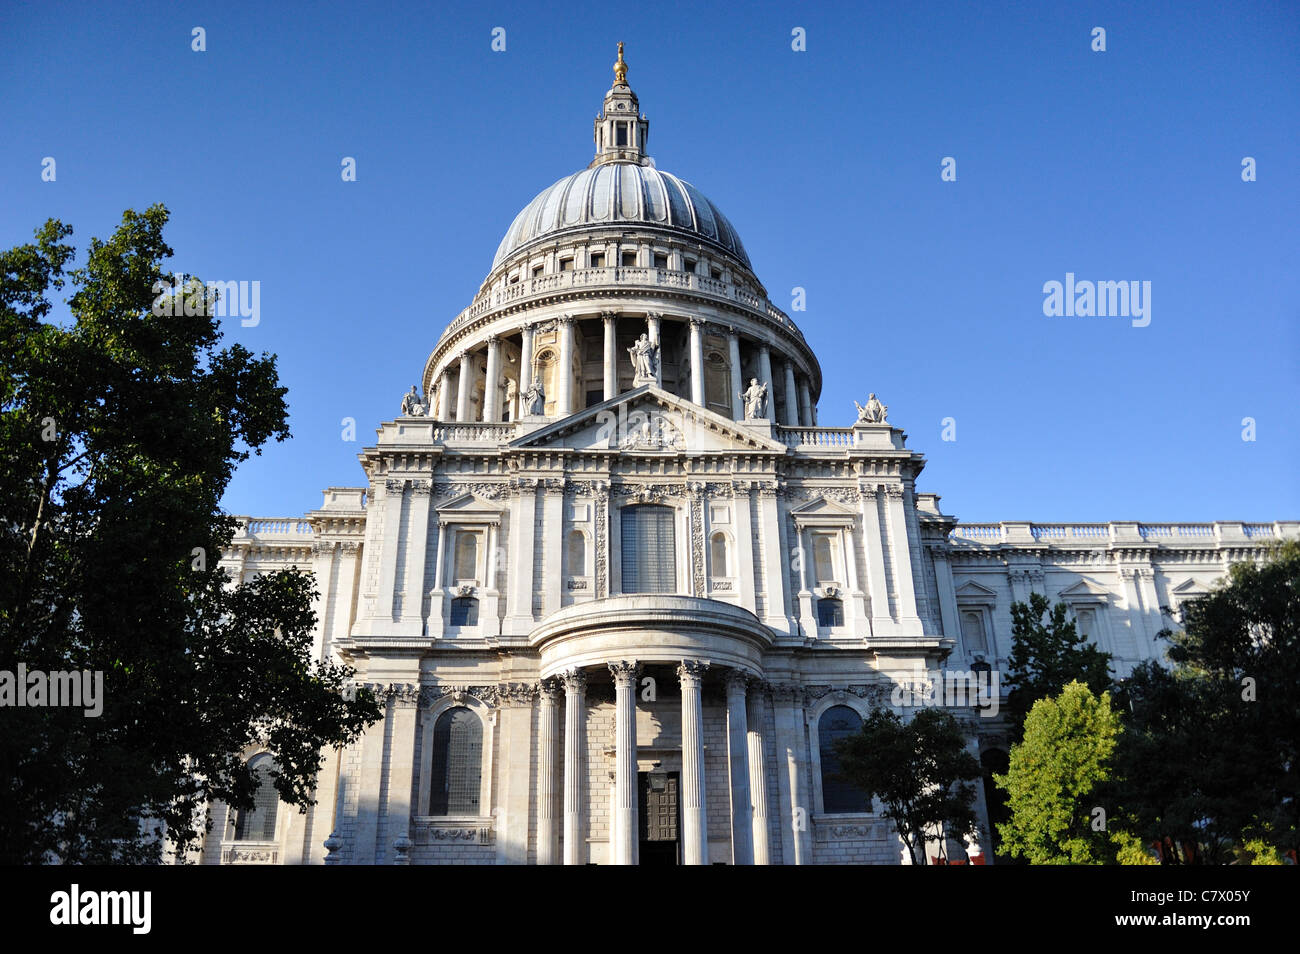 St Pauls cathedral London Stock Photo